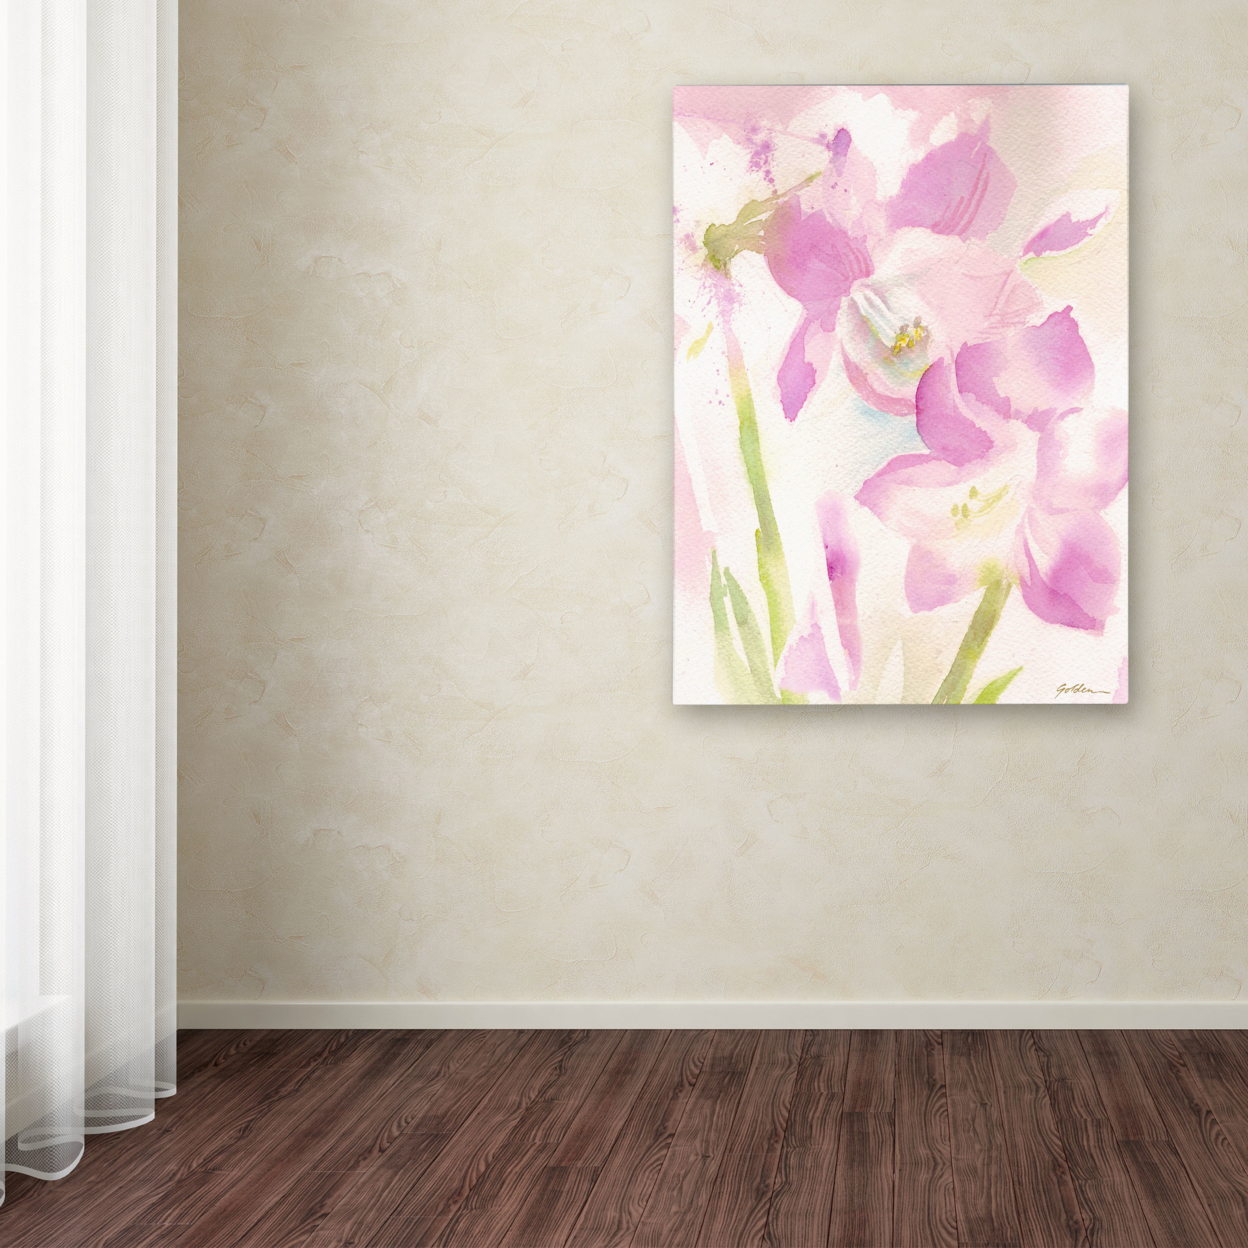 Sheila Golden 'Amaryllis Blossoming' Canvas Wall Art 35 X 47 Inches